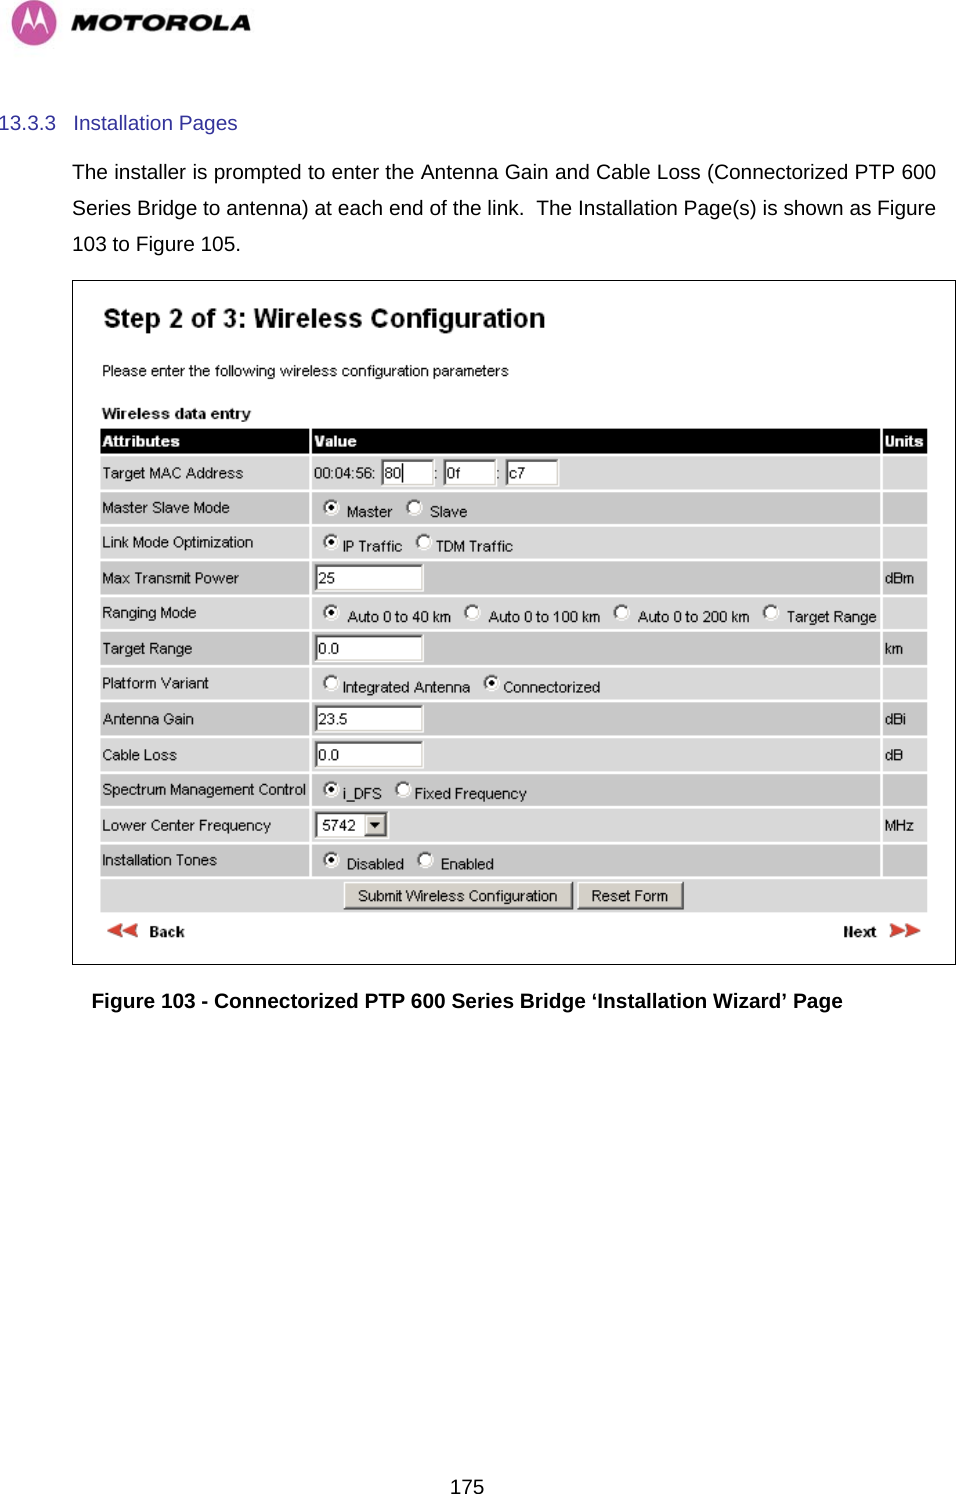   17513.3.3 Installation Pages The installer is prompted to enter the Antenna Gain and Cable Loss (Connectorized PTP 600 Series Bridge to antenna) at each end of the link.  The Installation Page(s) is shown as Figure 103 to Figure 105.  Figure 103 - Connectorized PTP 600 Series Bridge ‘Installation Wizard’ Page 